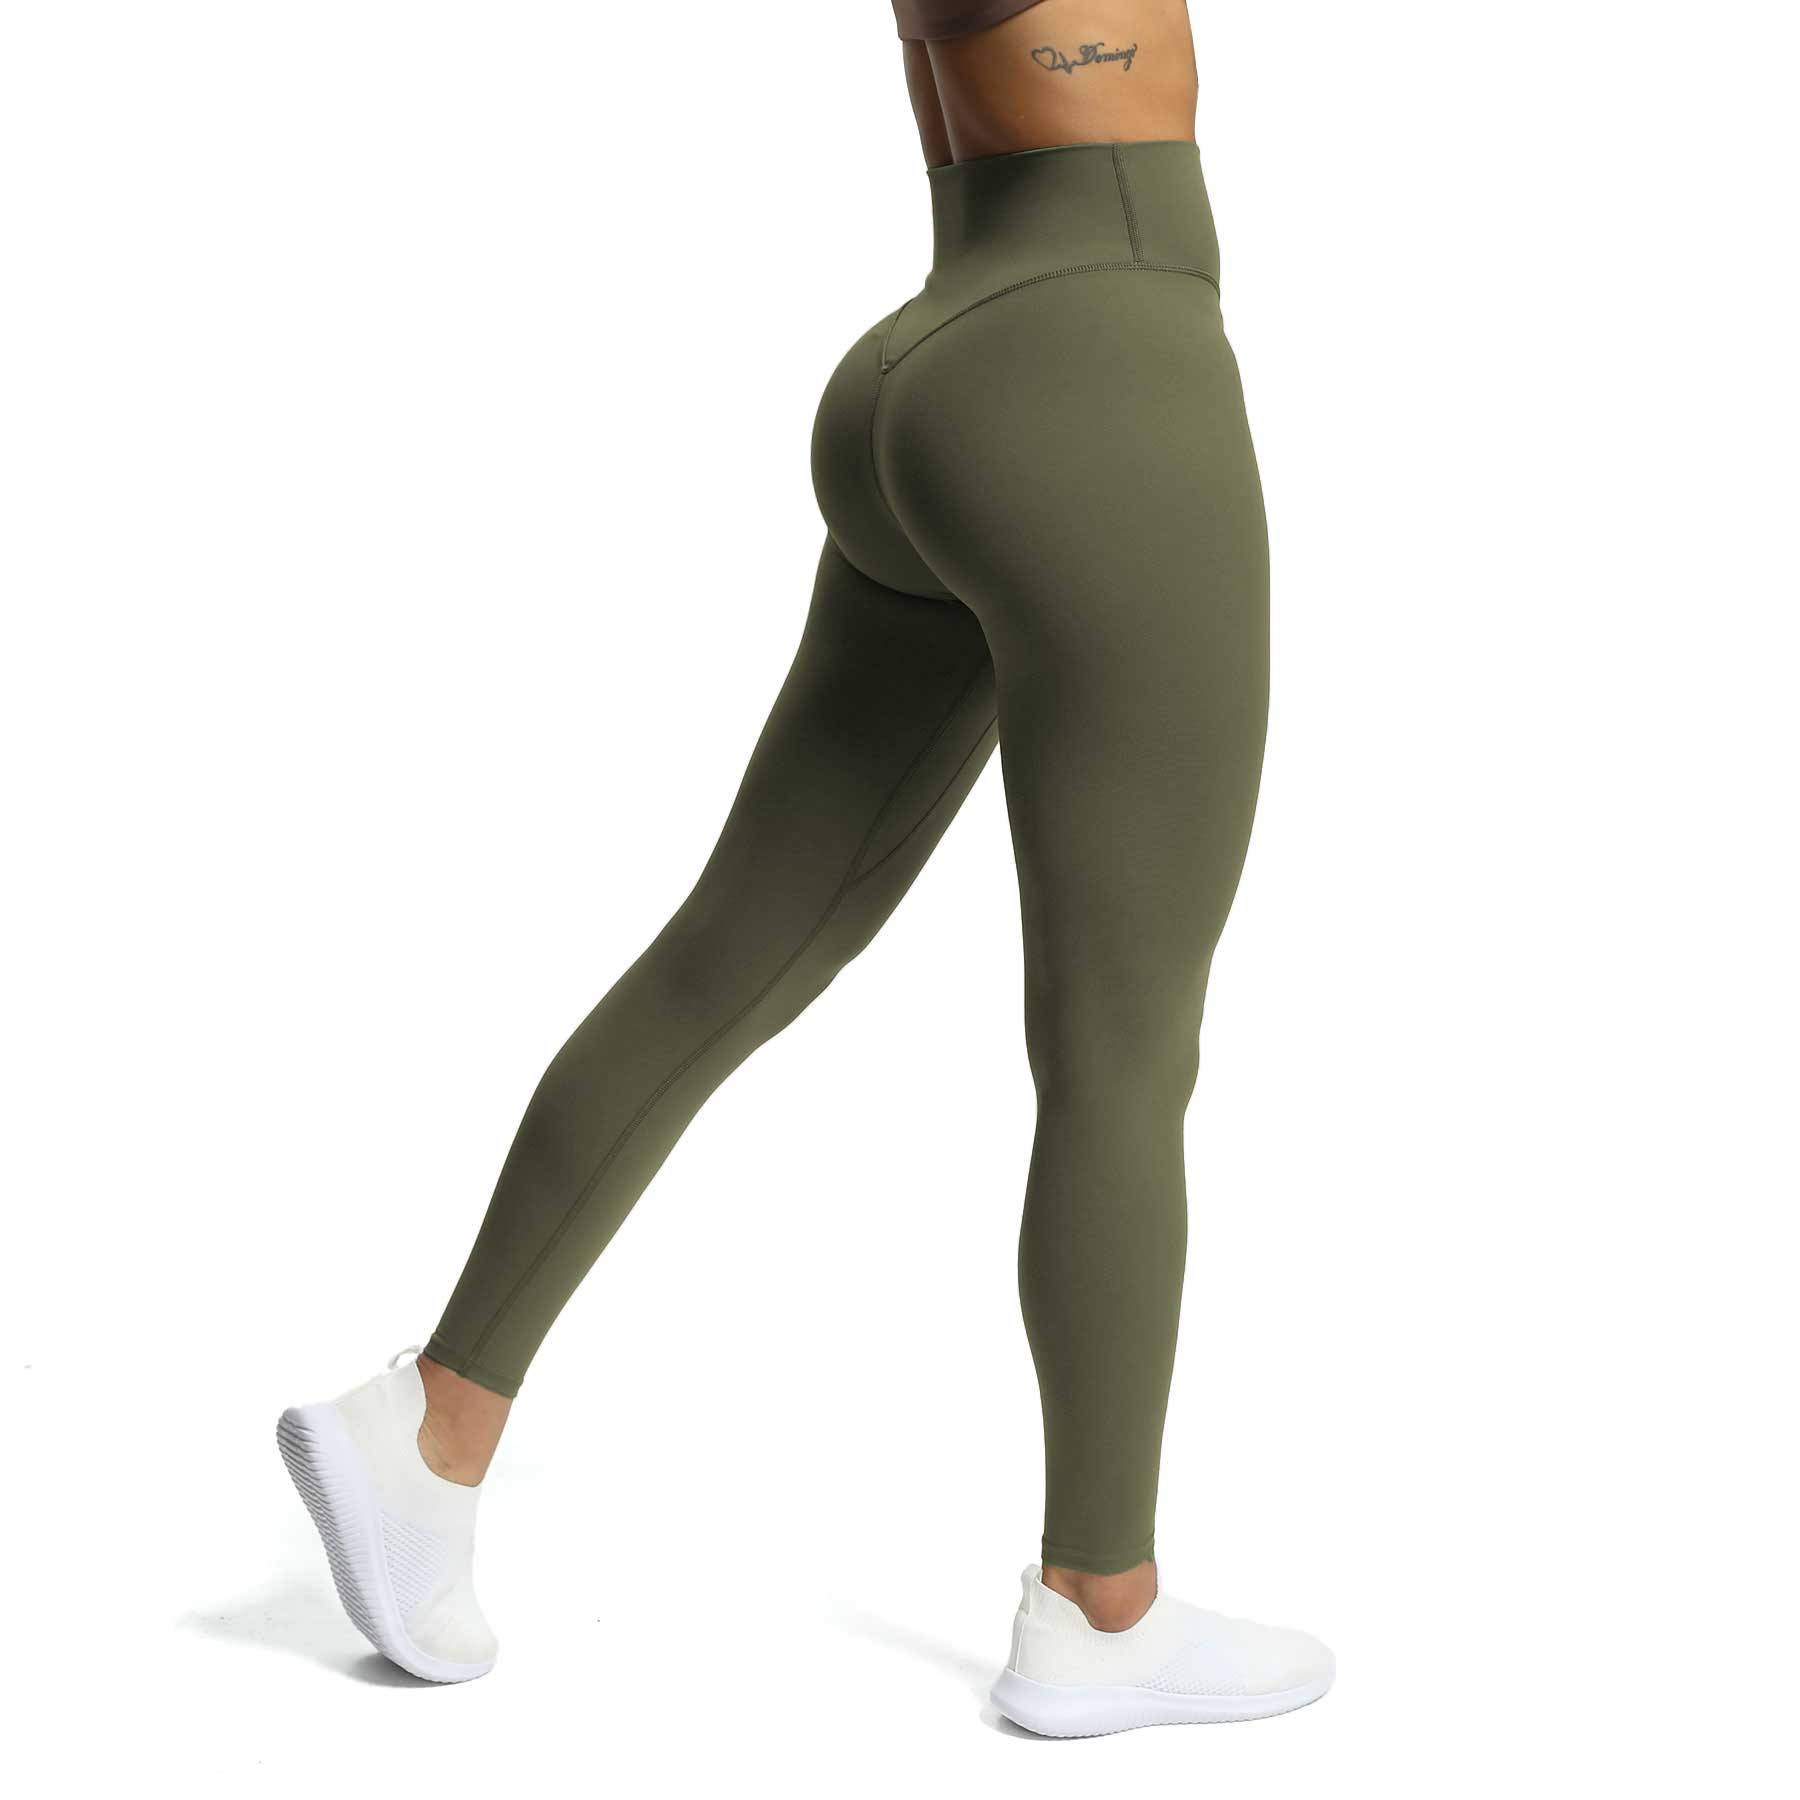  Aoxjox High Waisted Workout Leggings For Women Tummy Control  Buttery Soft Yoga Metamorph Deep V Pants 27